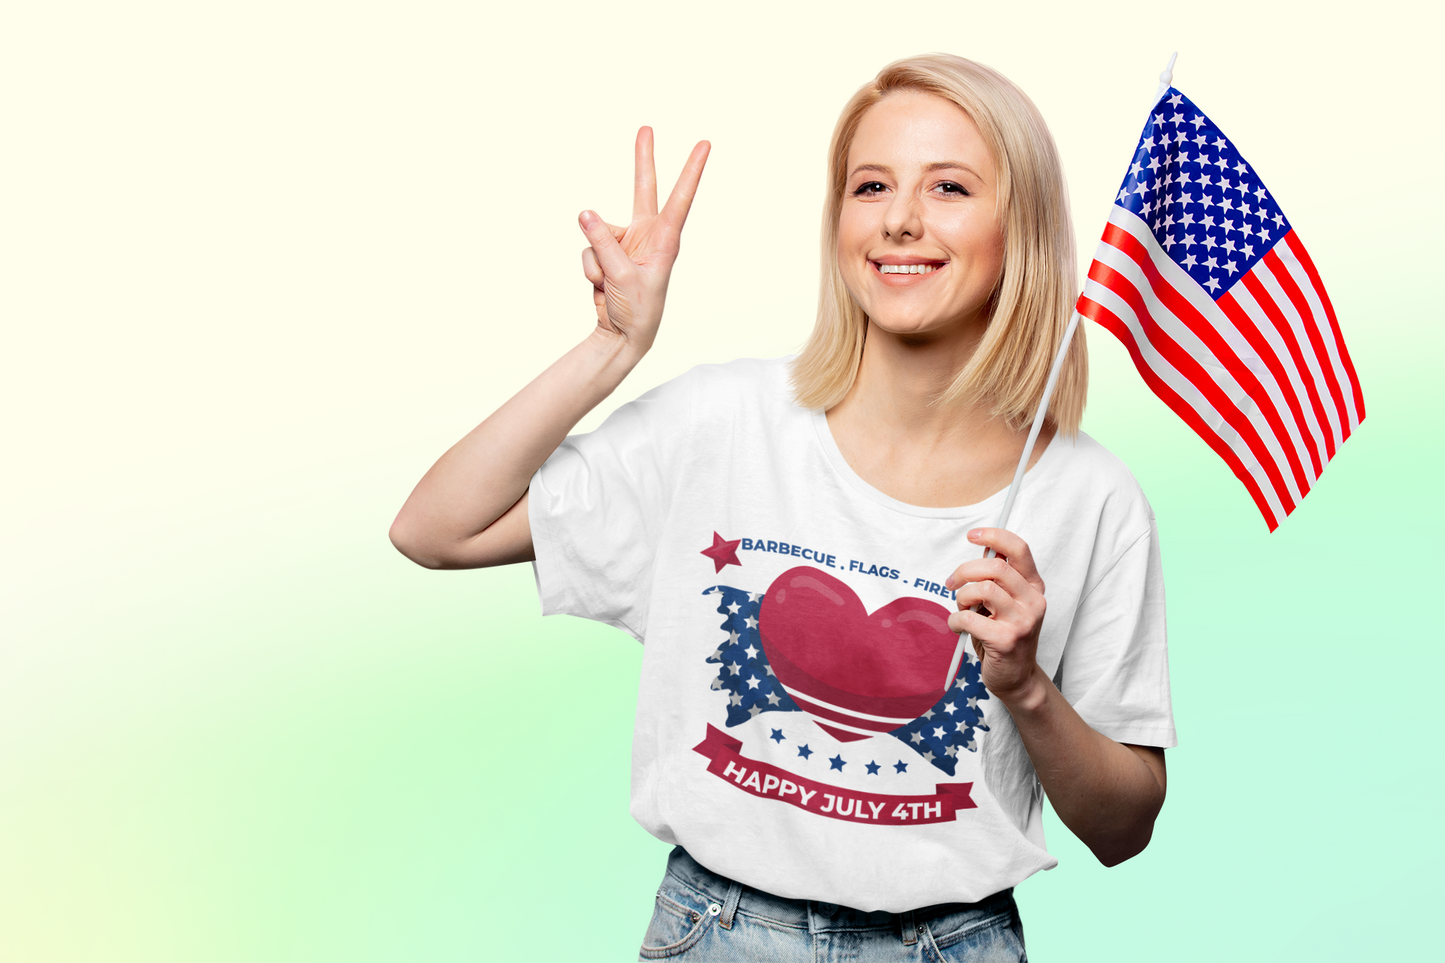 Barbecue Flags Fireworks Happy July 4th Youth Short Sleeve Tee